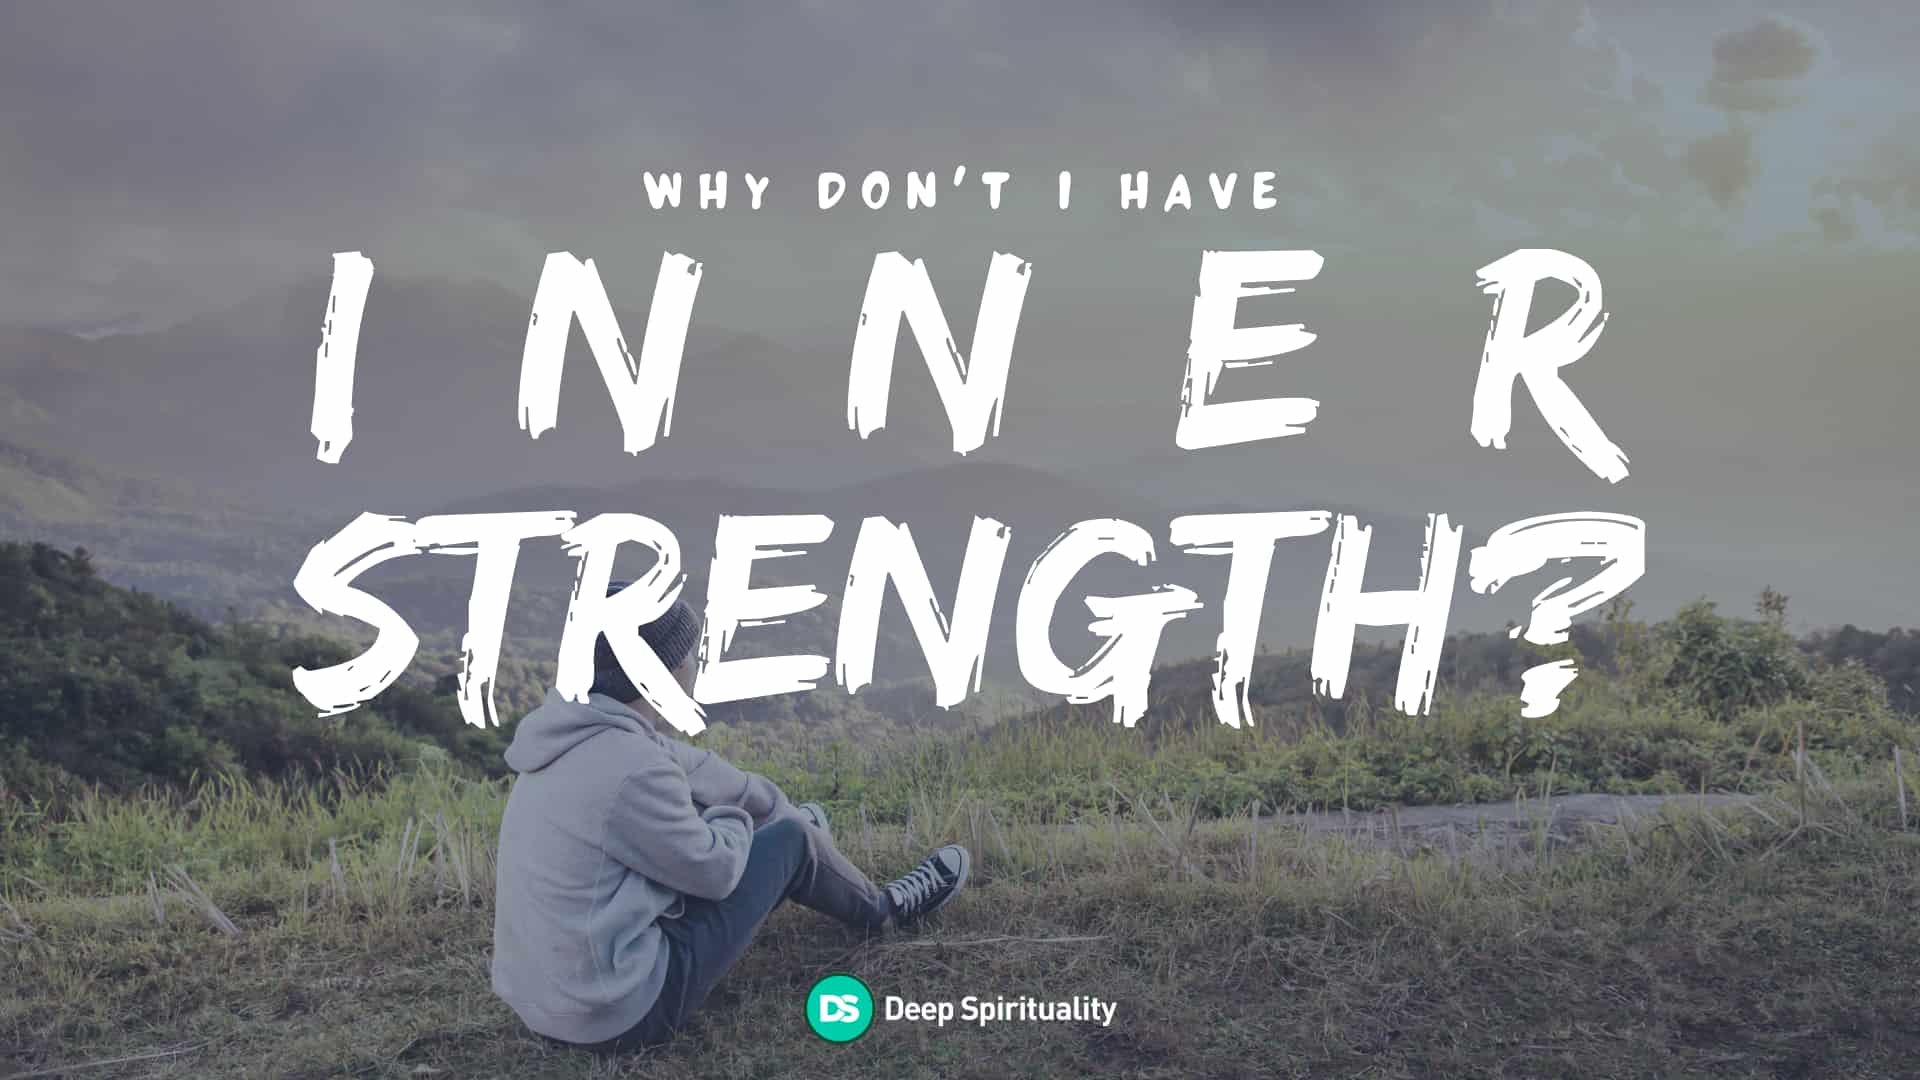 Why don't I have inner strength?